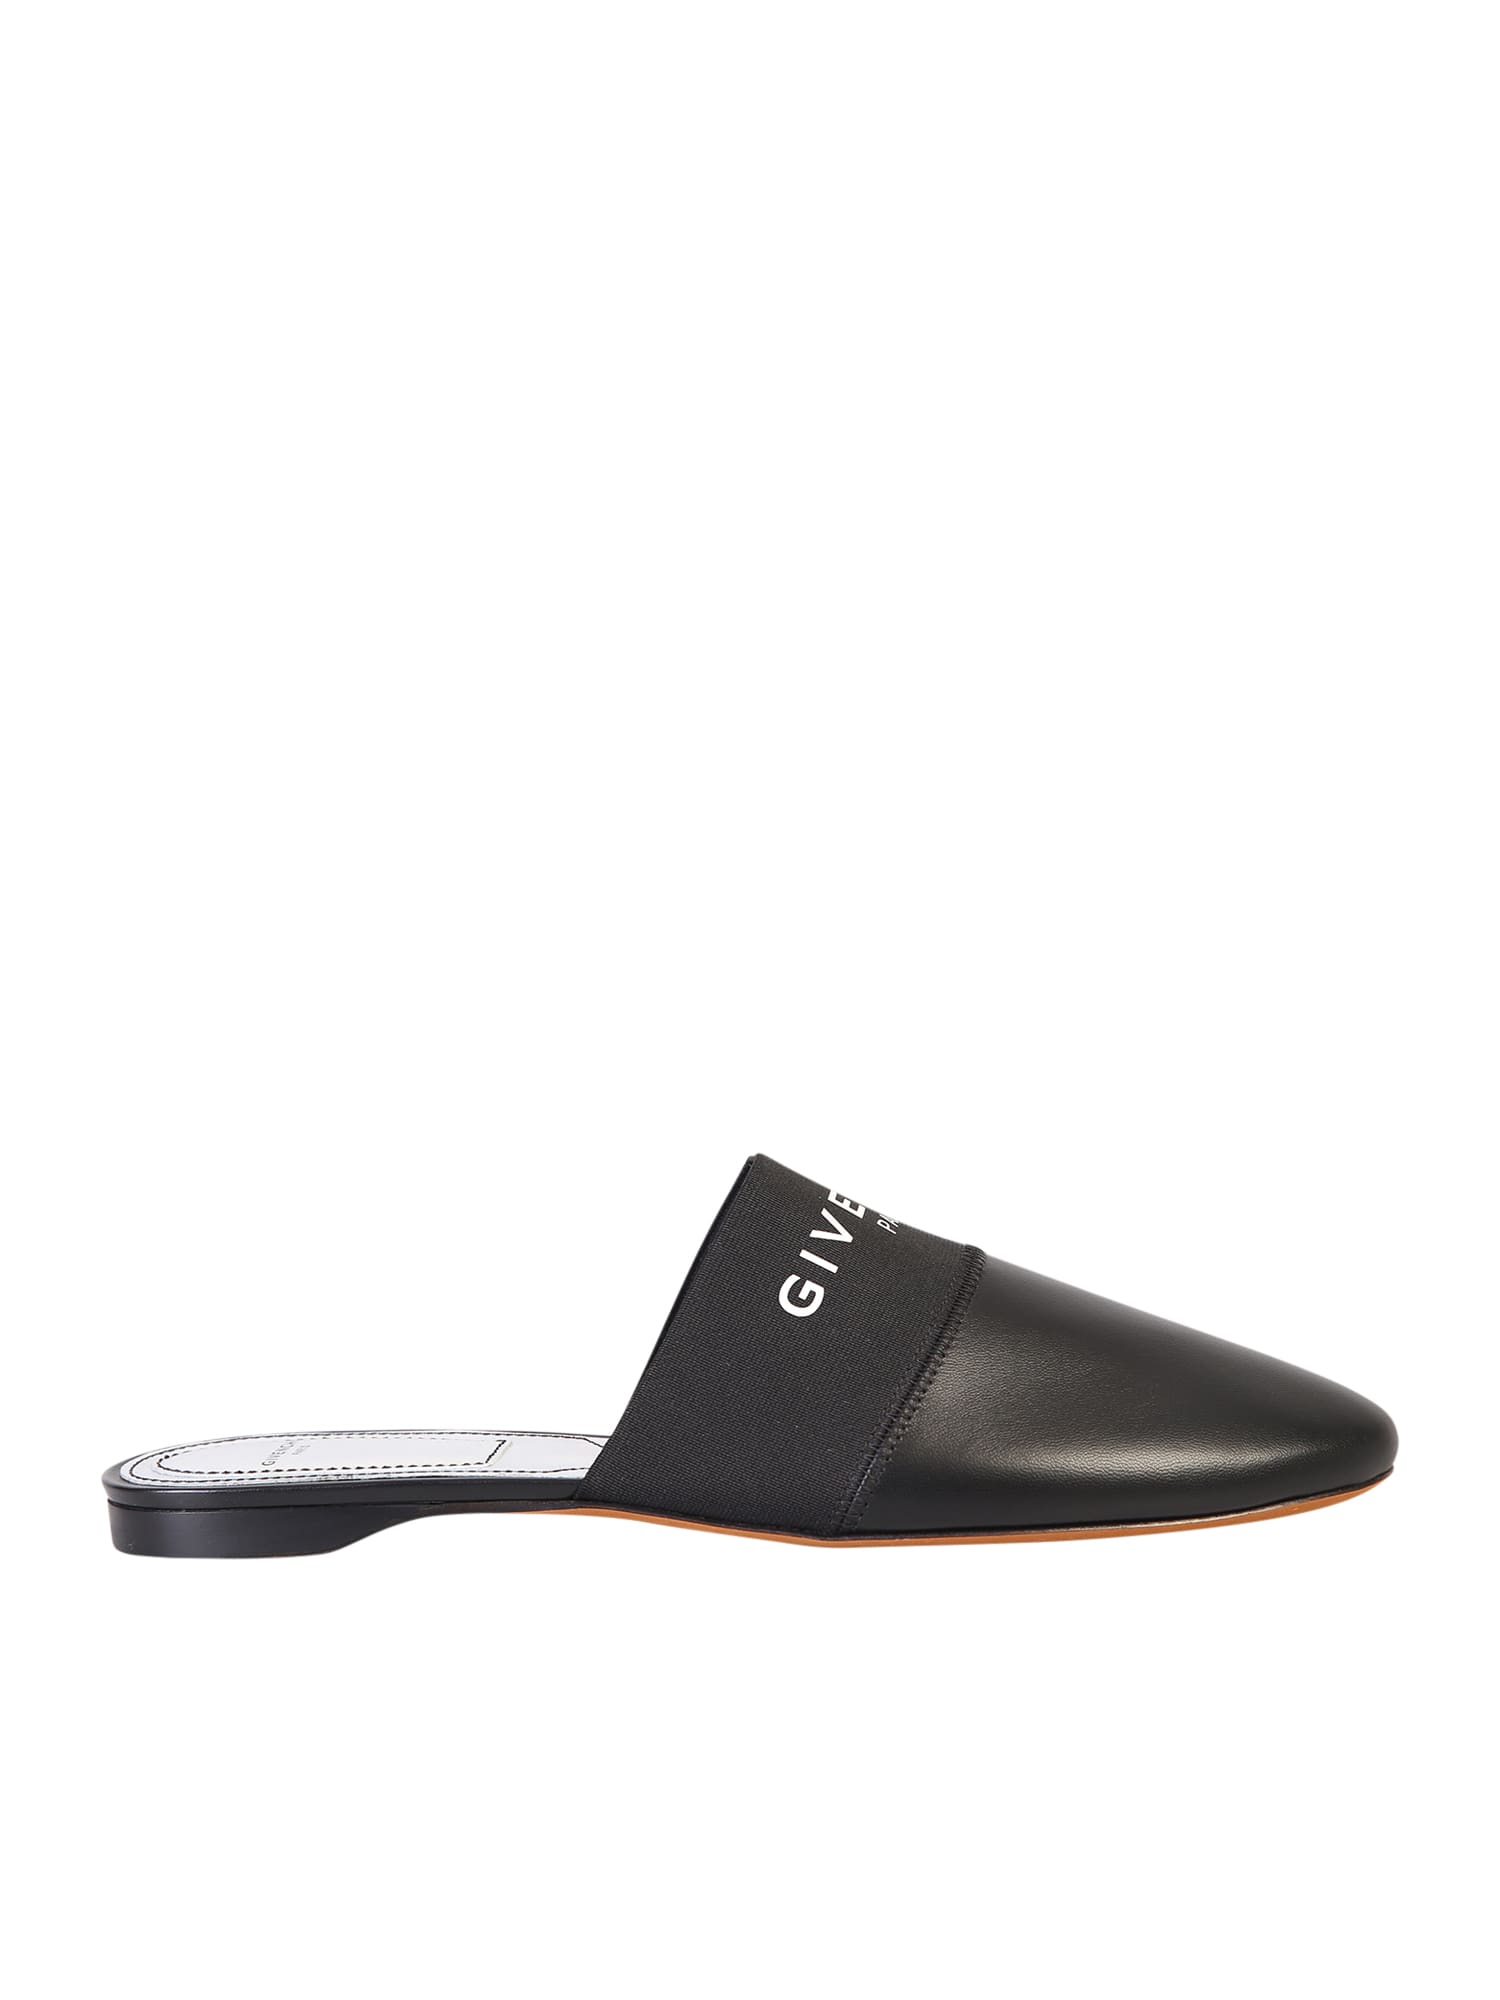 Buy Givenchy Branded Flats online, shop Givenchy shoes with free shipping